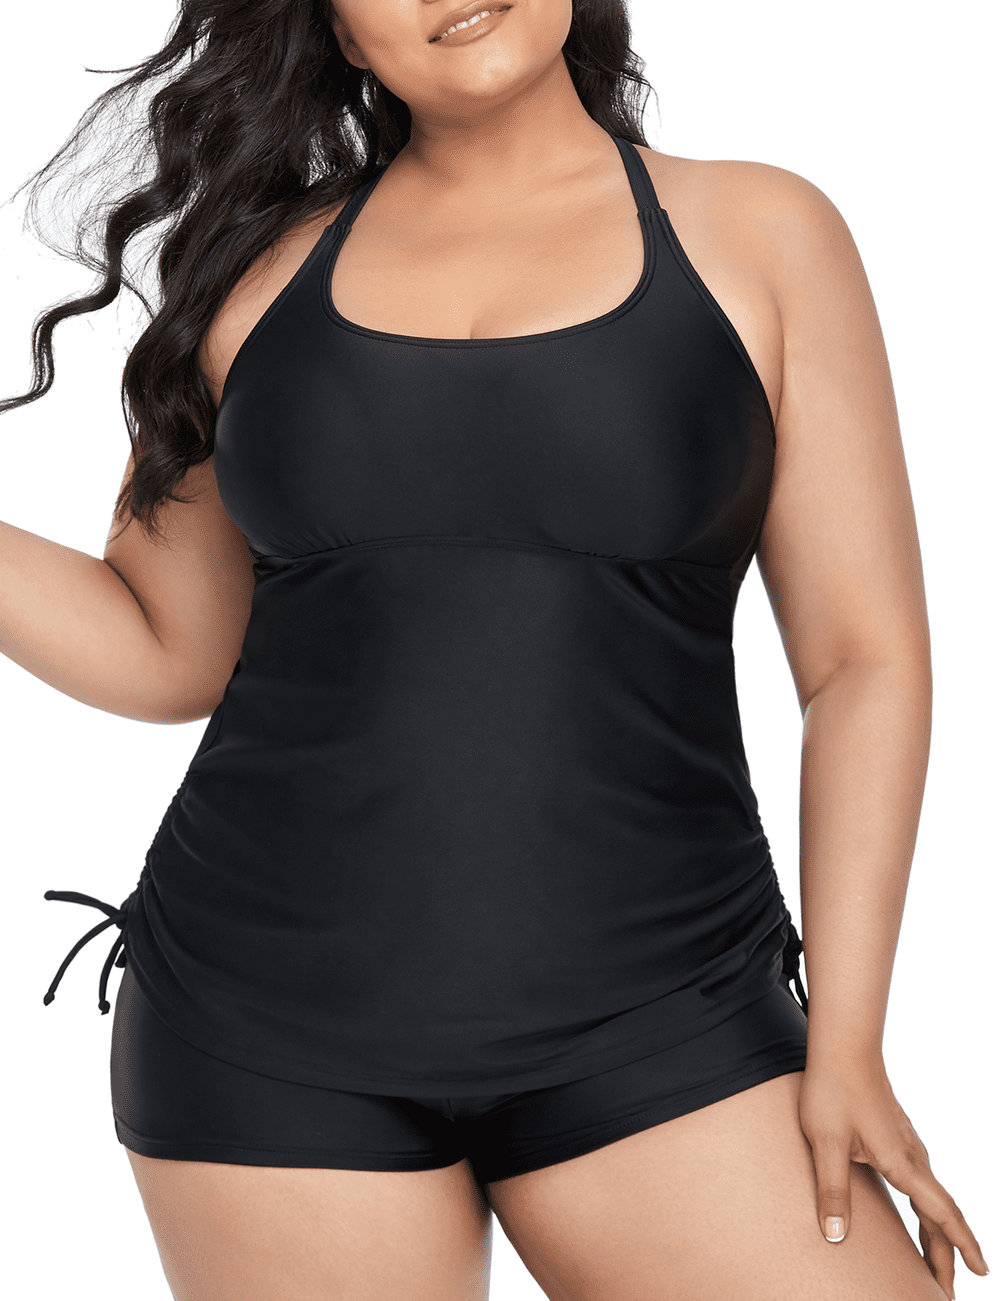 Mycoco Plus Size Two Piece Tankini Swimsuit for Women Athletic Bathing Suits High Neck Tankini Top with Shorts 